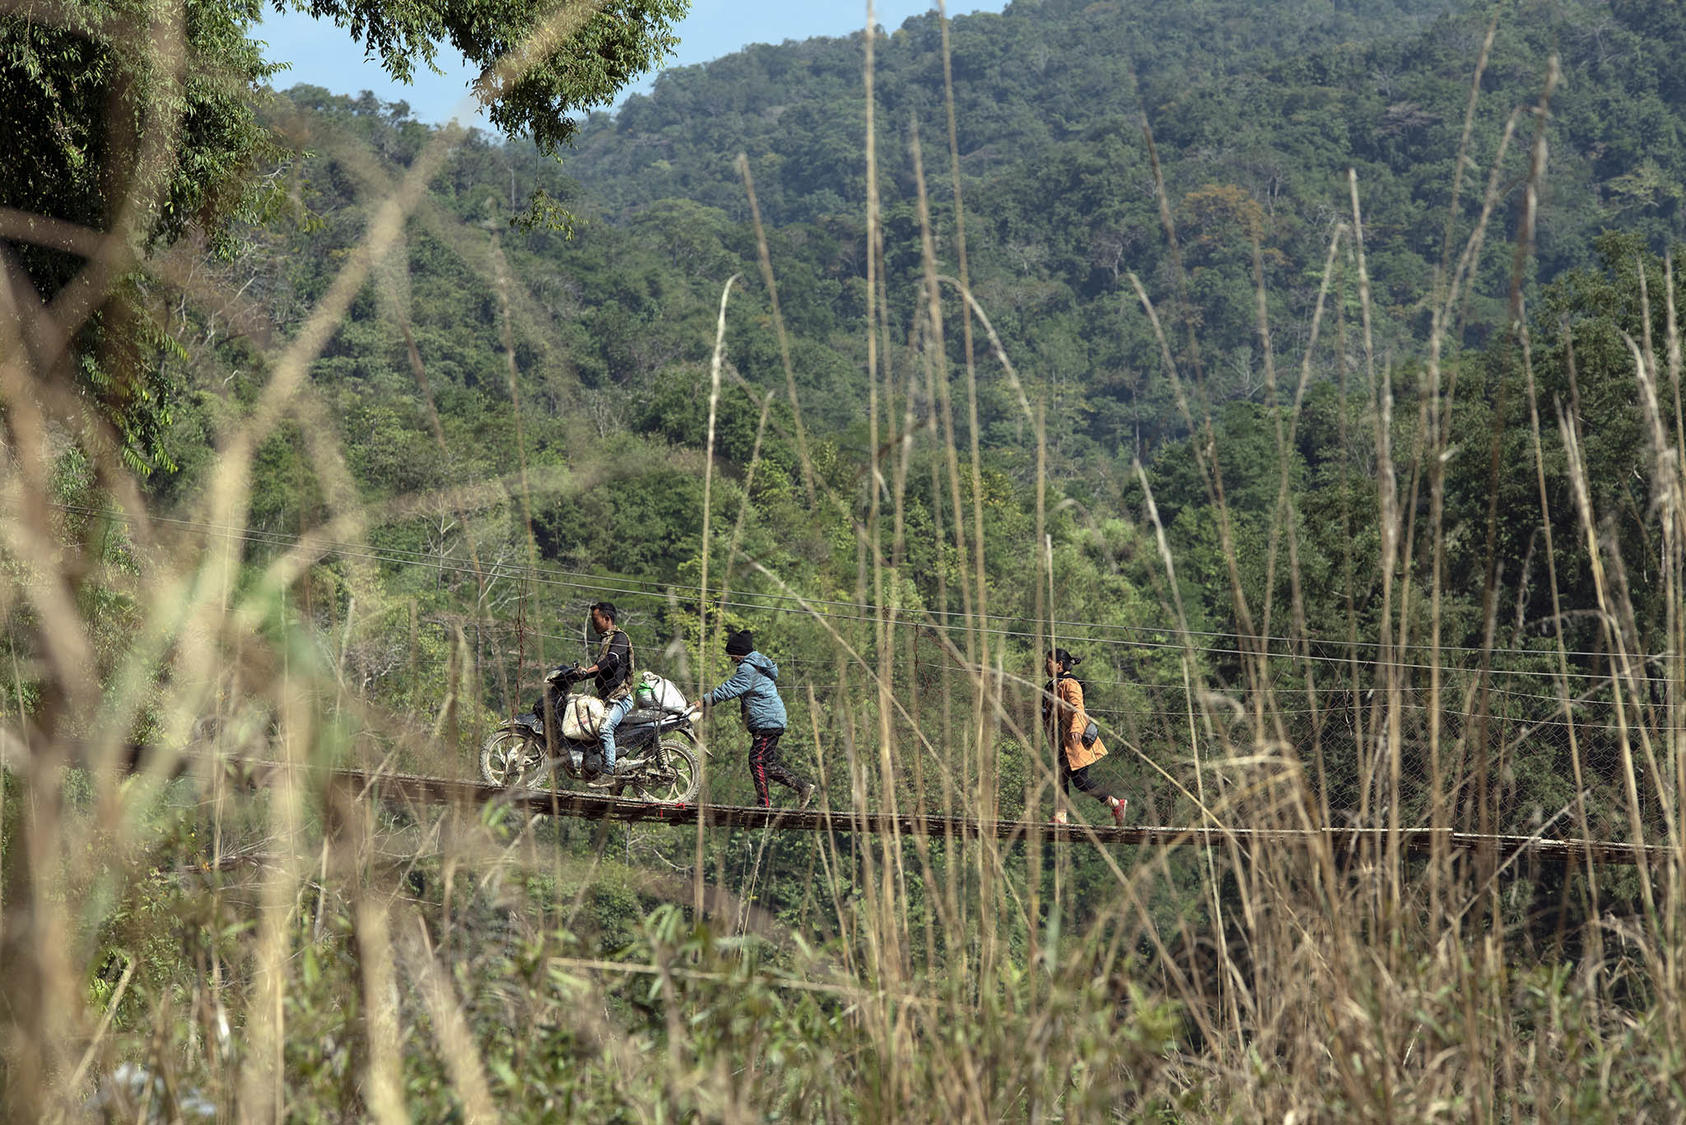 Refugees cross over from Myanmar into Mizoram, India, on a wooden bridge over the Tiau River on Dec. 12, 2021. (Saumya Khandelwal/The New York Times)